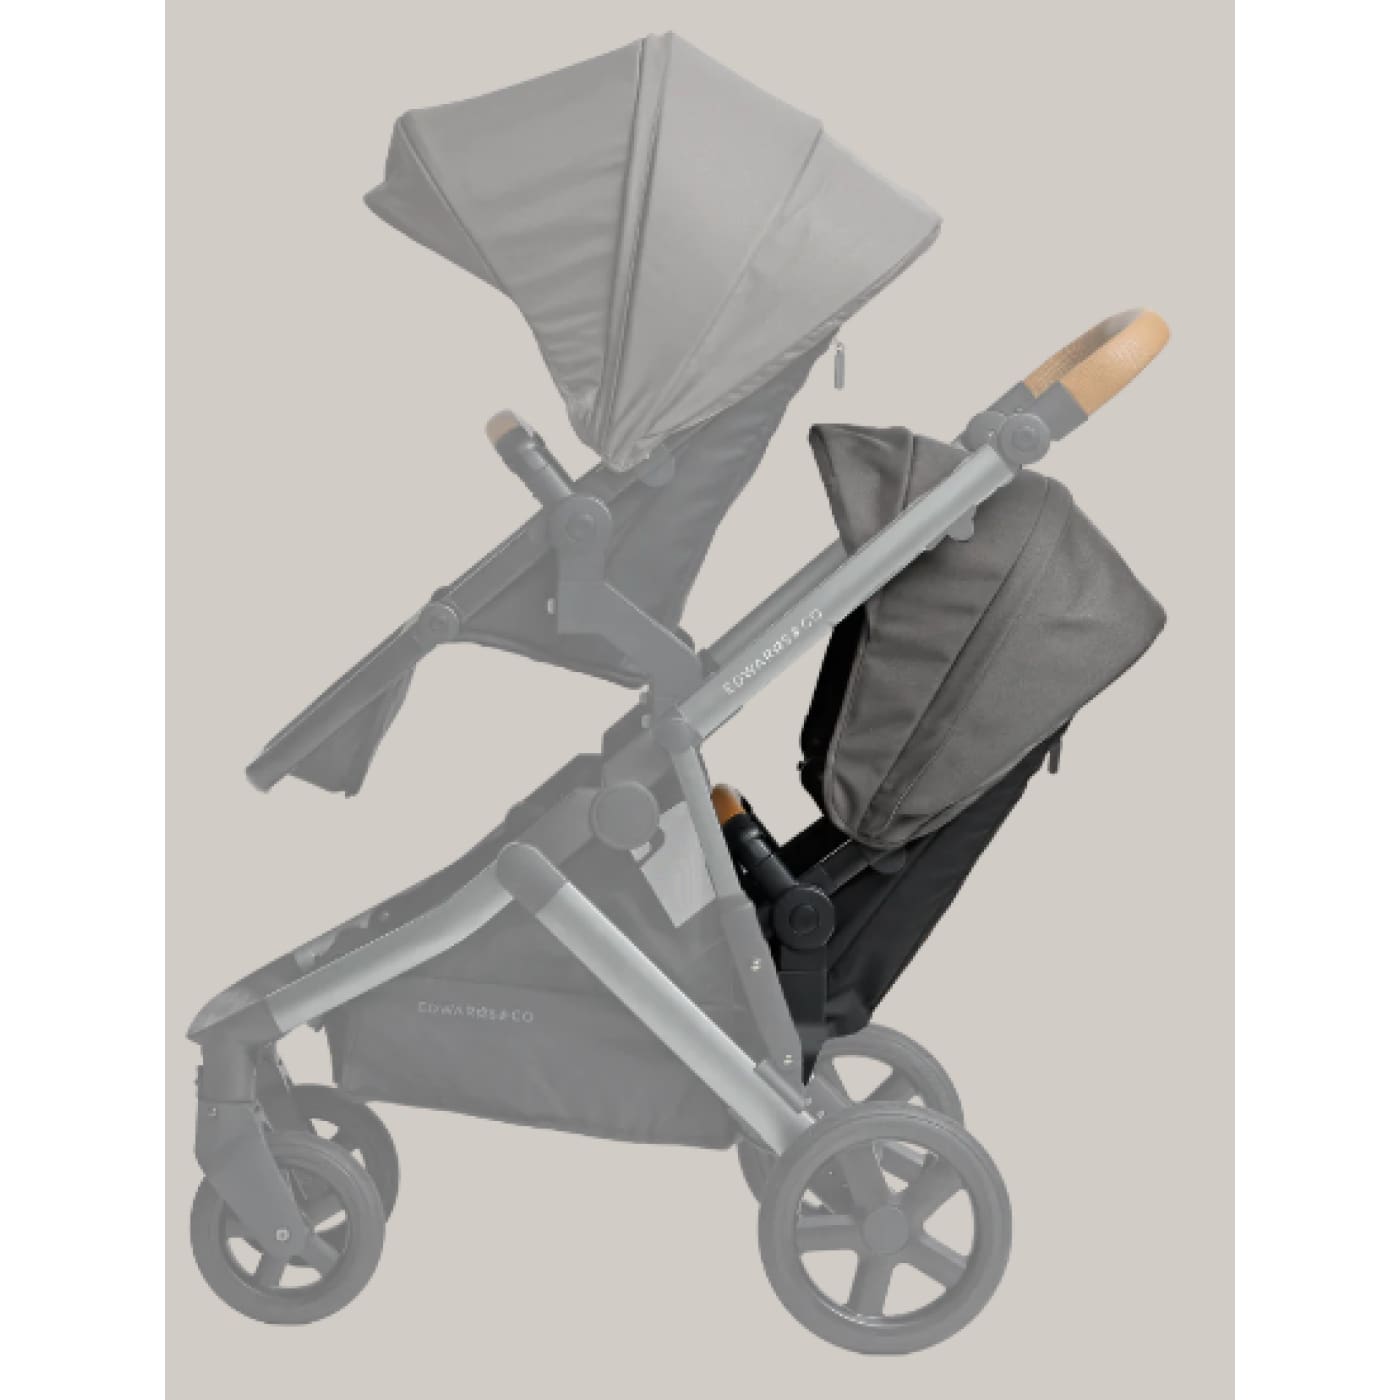 Edwards & Co Olive Stroller Second Seat Kit Special Edition - Ochre Grey - Ochre Grey - PRAMS & STROLLERS - TODDLER SEATS/CONVERSION KITS